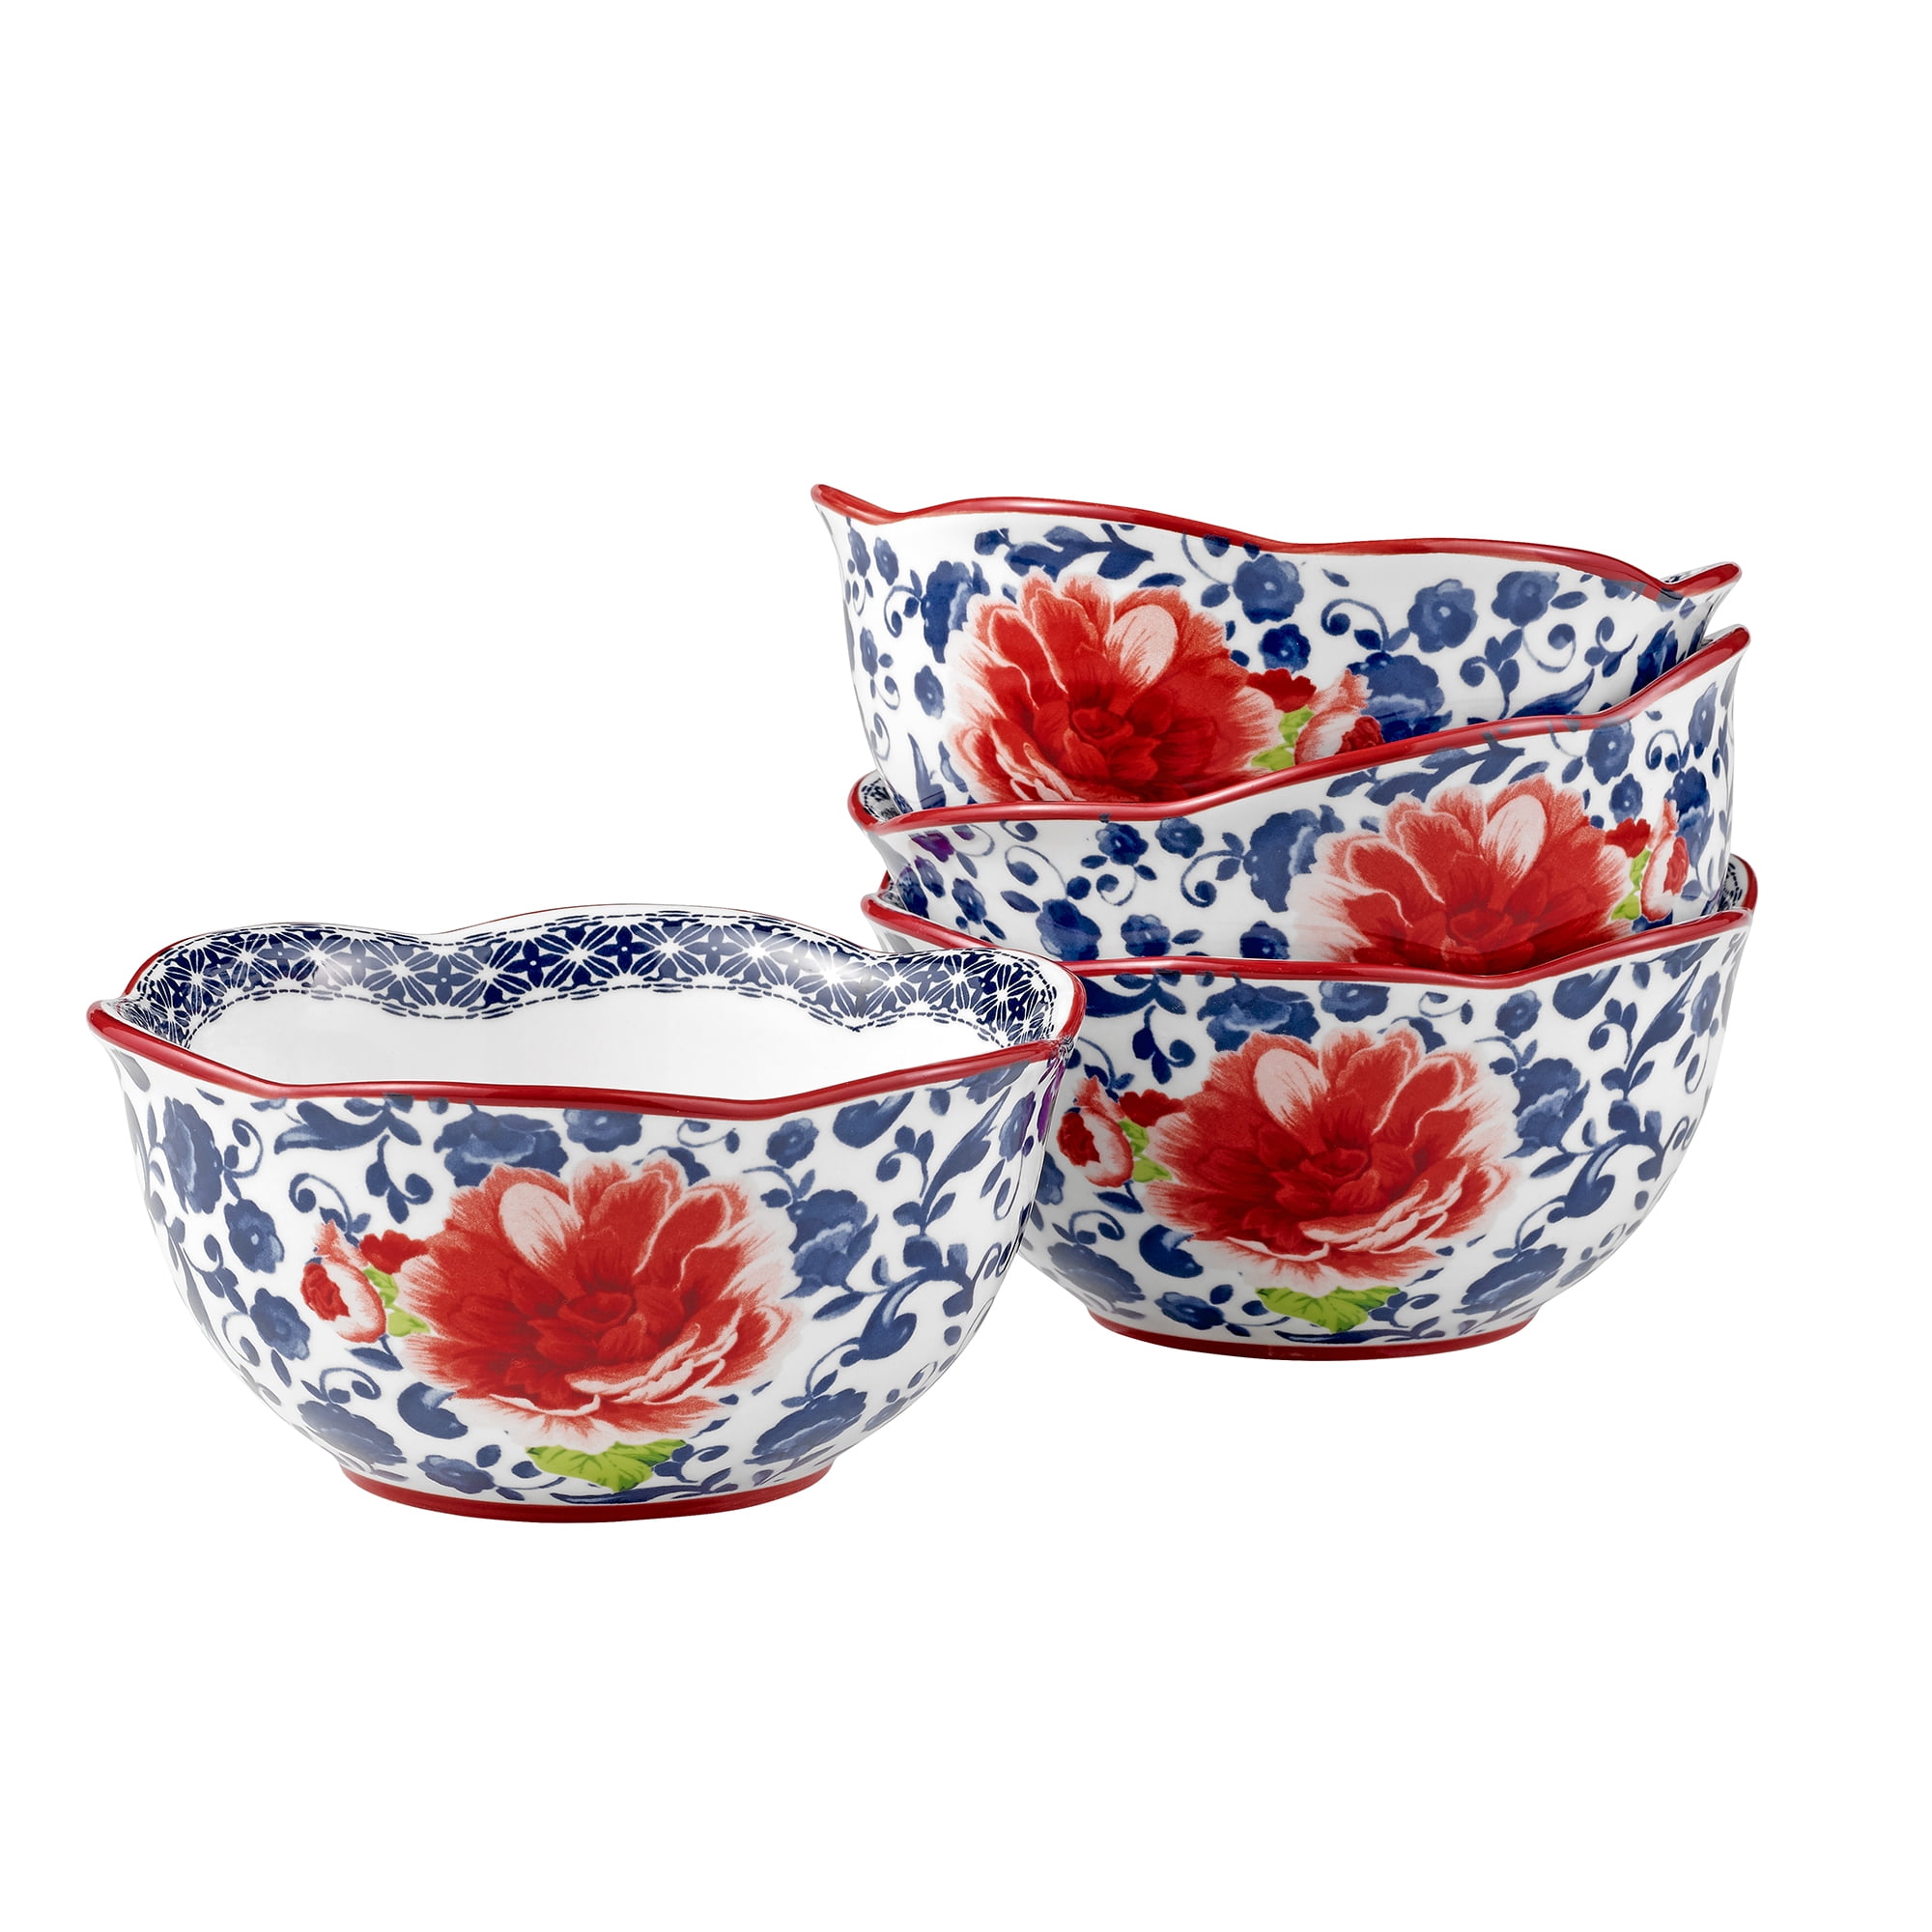 Details about   Pasta Bowl Set 4 Bowls THE PIONEER WOMAN Durable Floral Stoneware New 